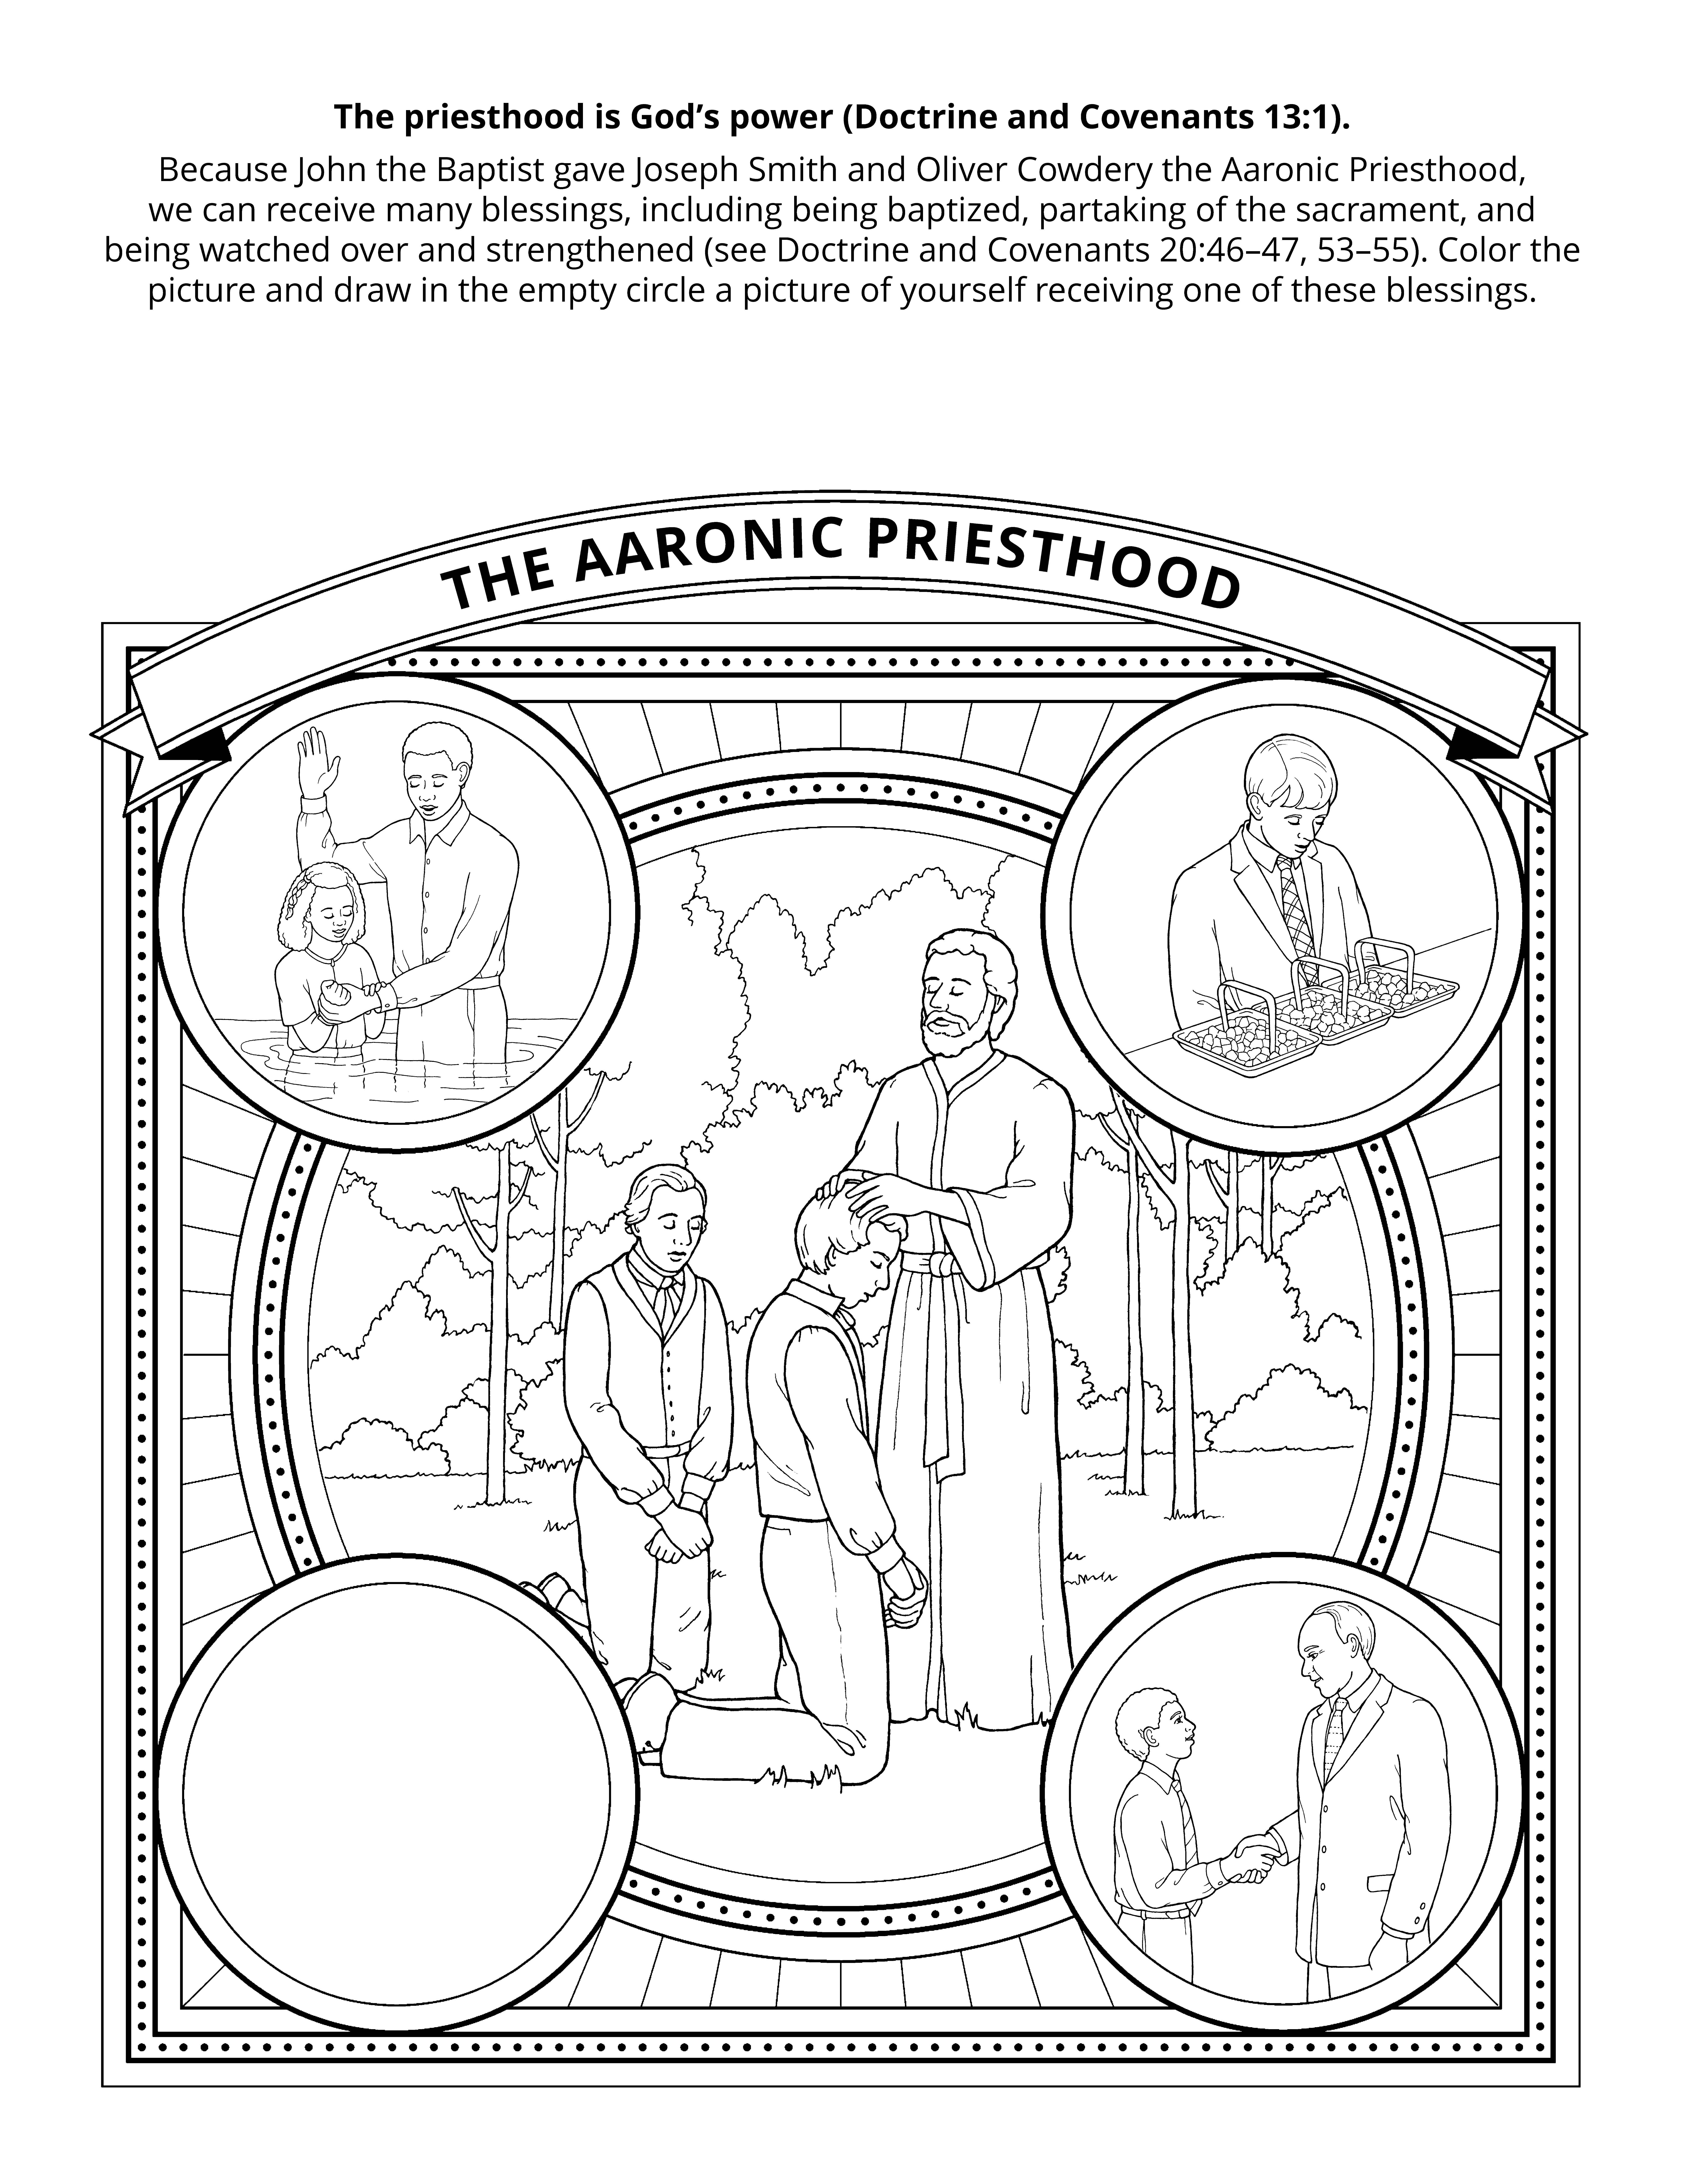 Line art illiustration depicts four aspects of Aaronic Priesthood for Primary-age children.